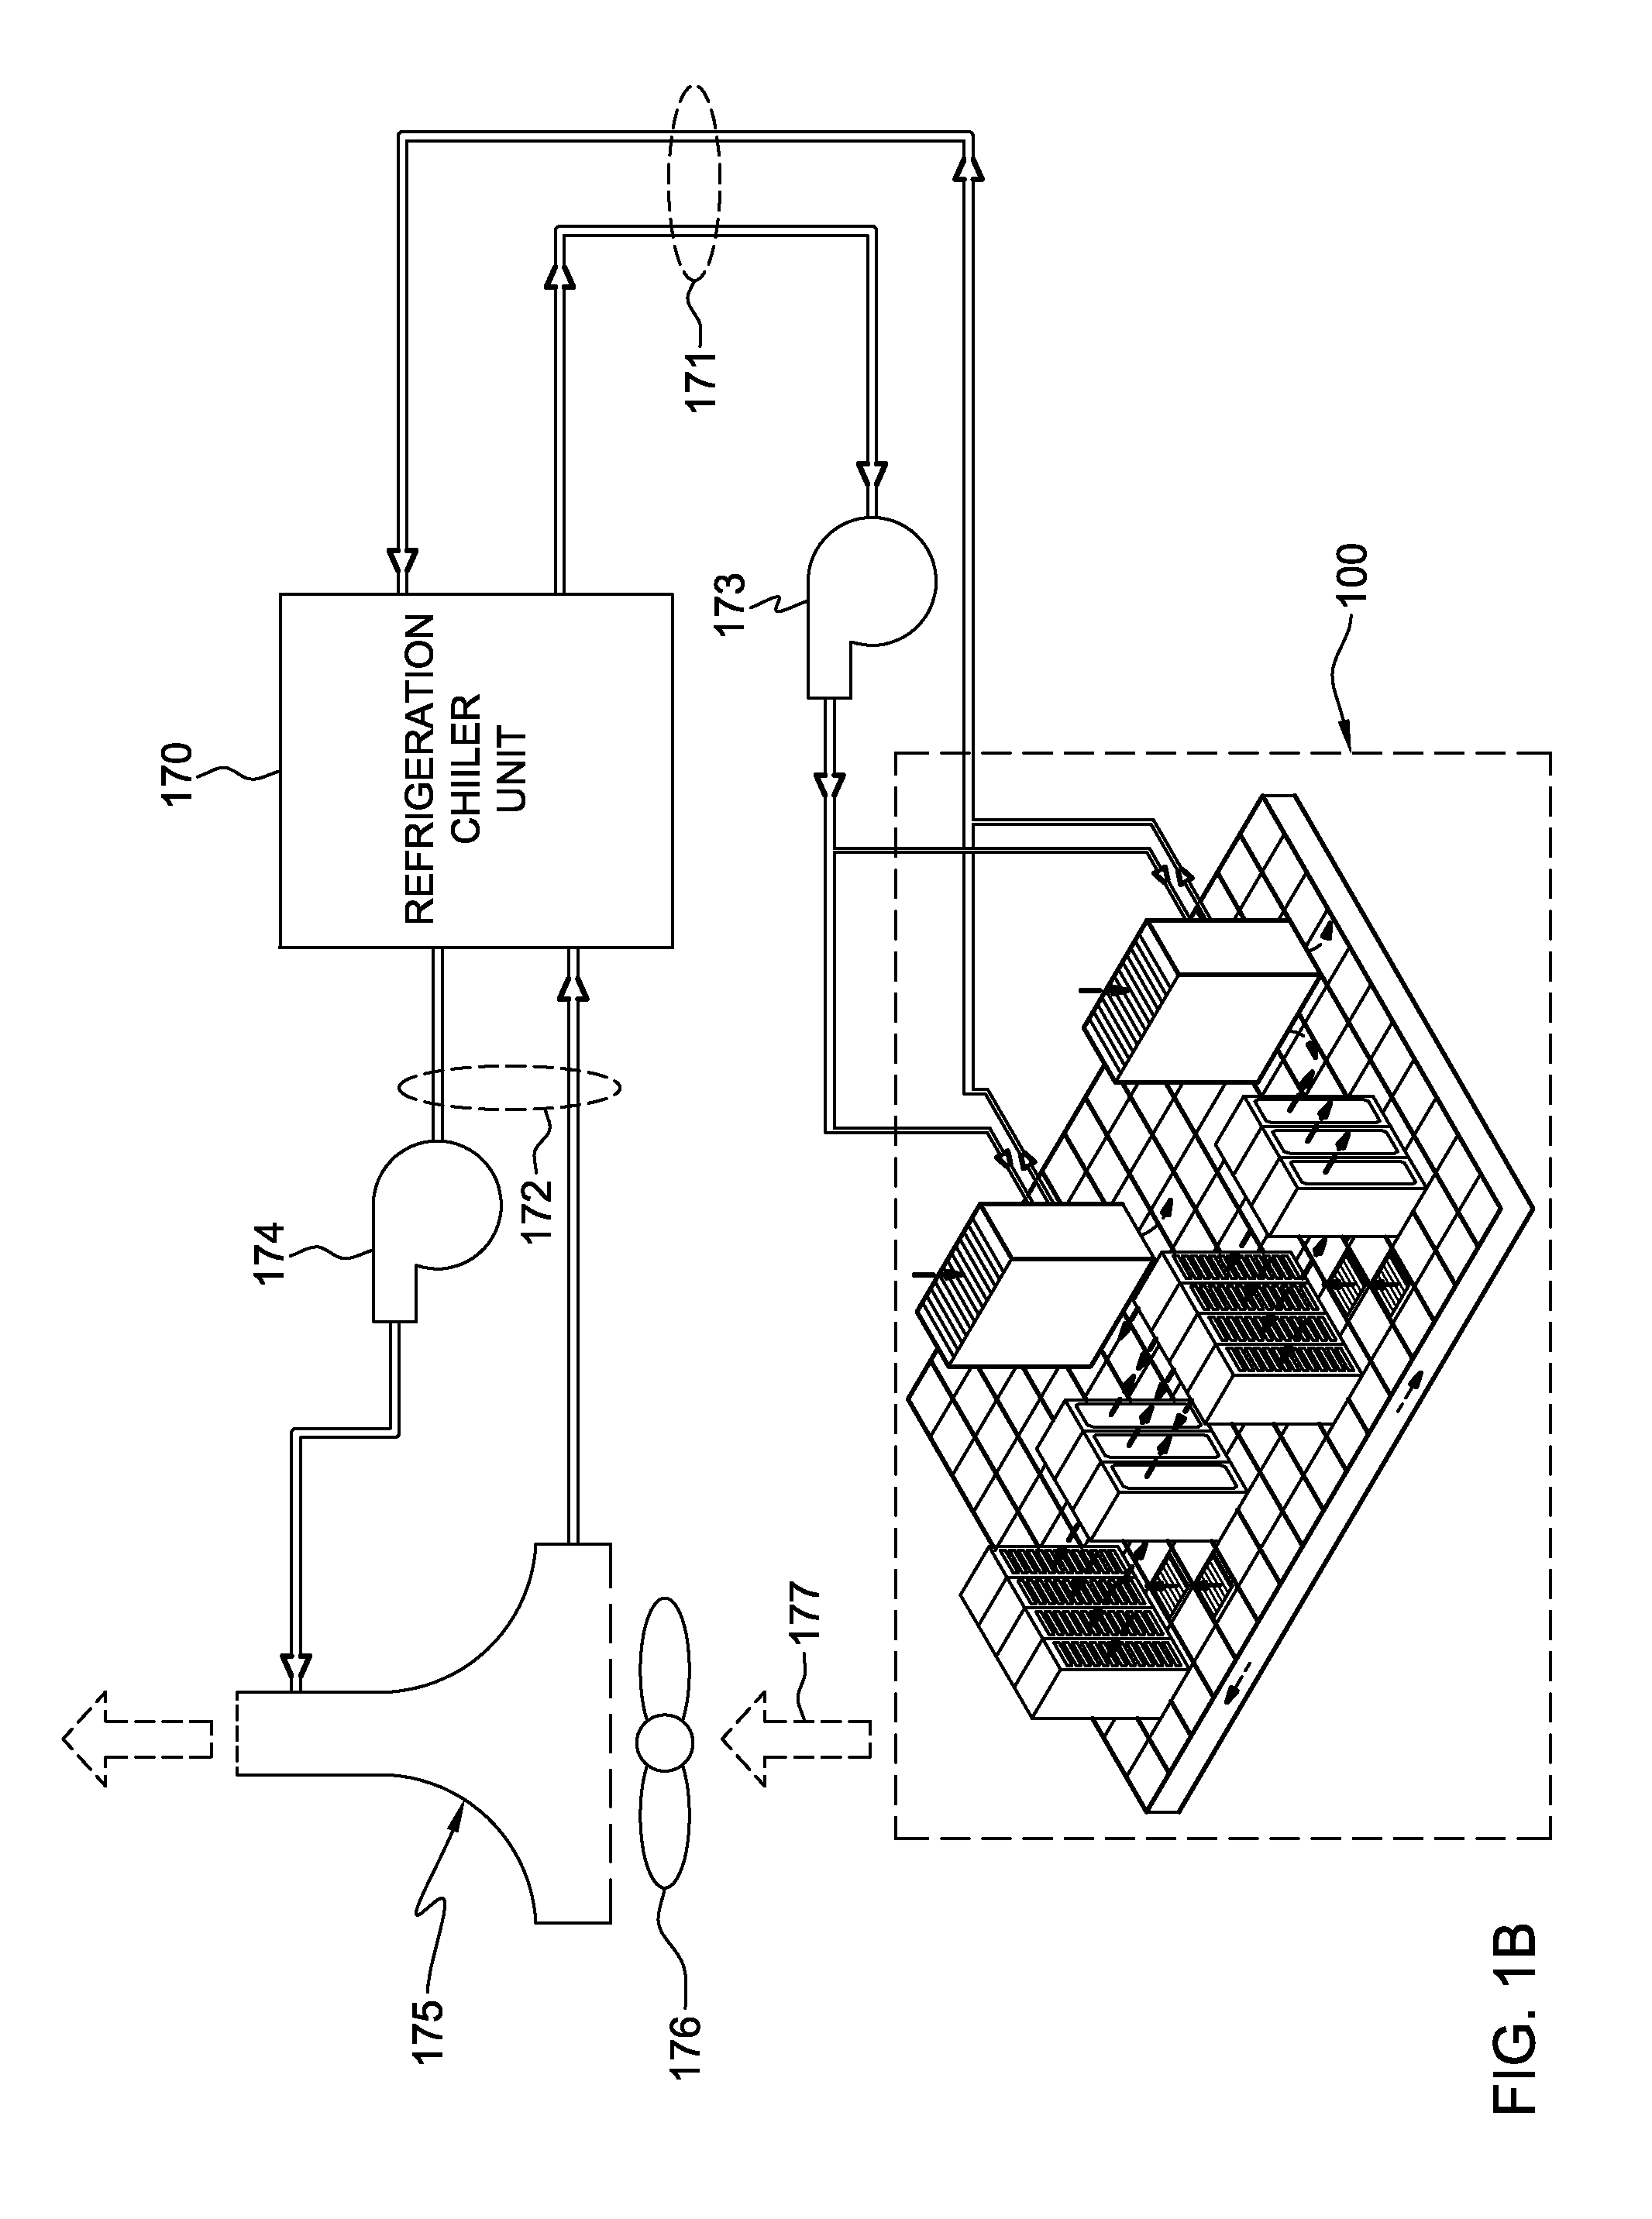 Dry-cooling unit with gravity-assisted coolant flow